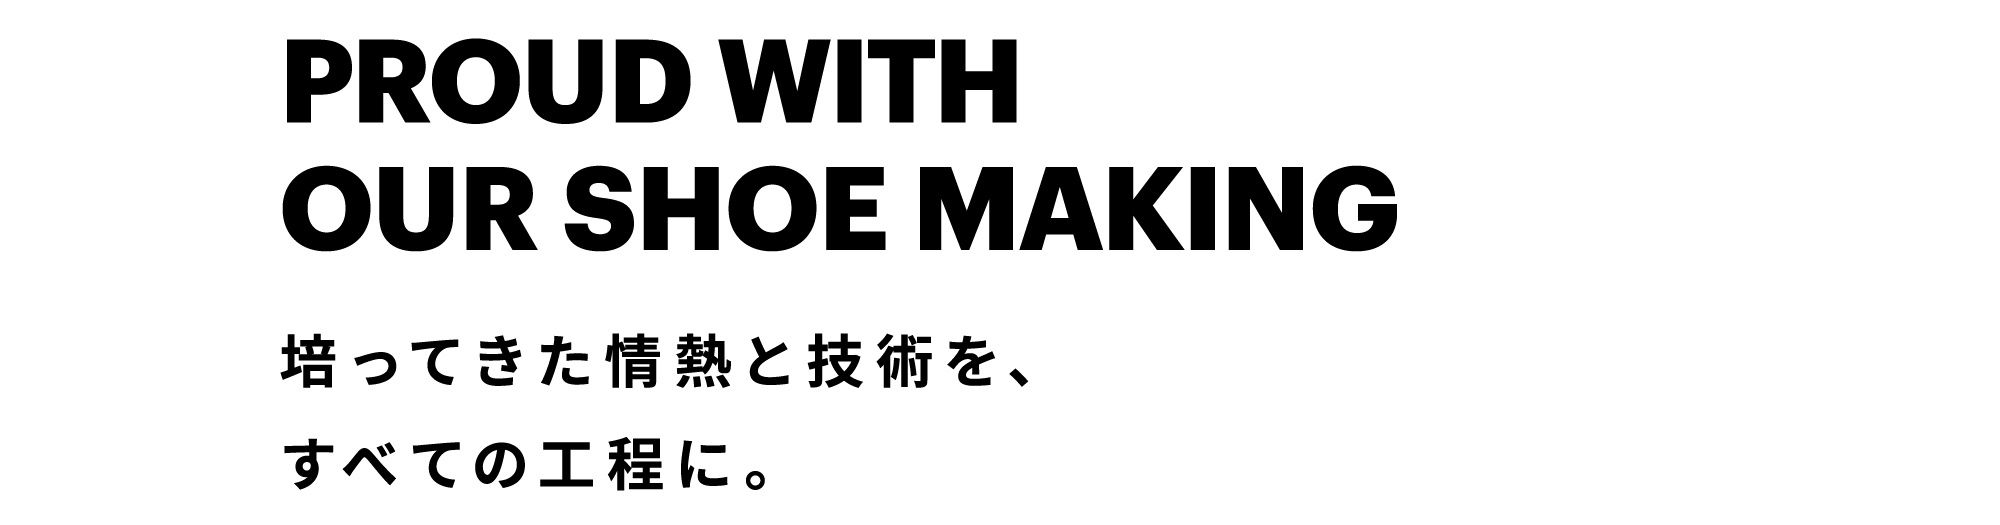 PROUD WITH OUR SHOE MAKING - 培ってきた情熱と技術を、すべての工程に。